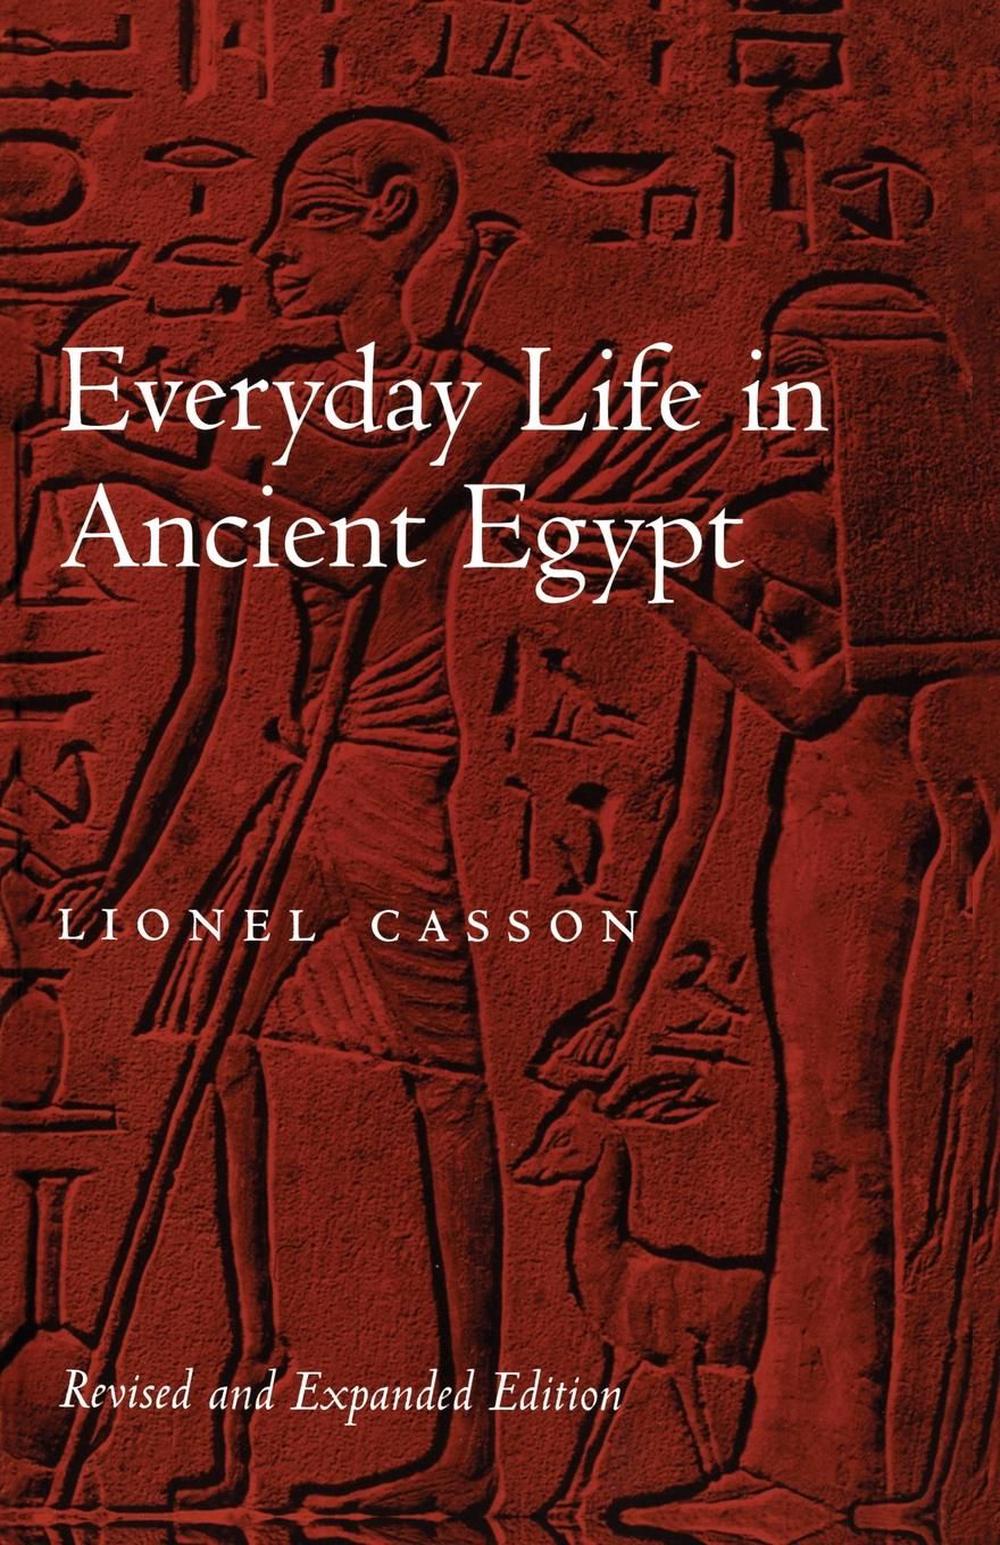 Everyday Life In Ancient Egypt By Lionel Casson Paperback 9780801866012 Buy Online At The Nile